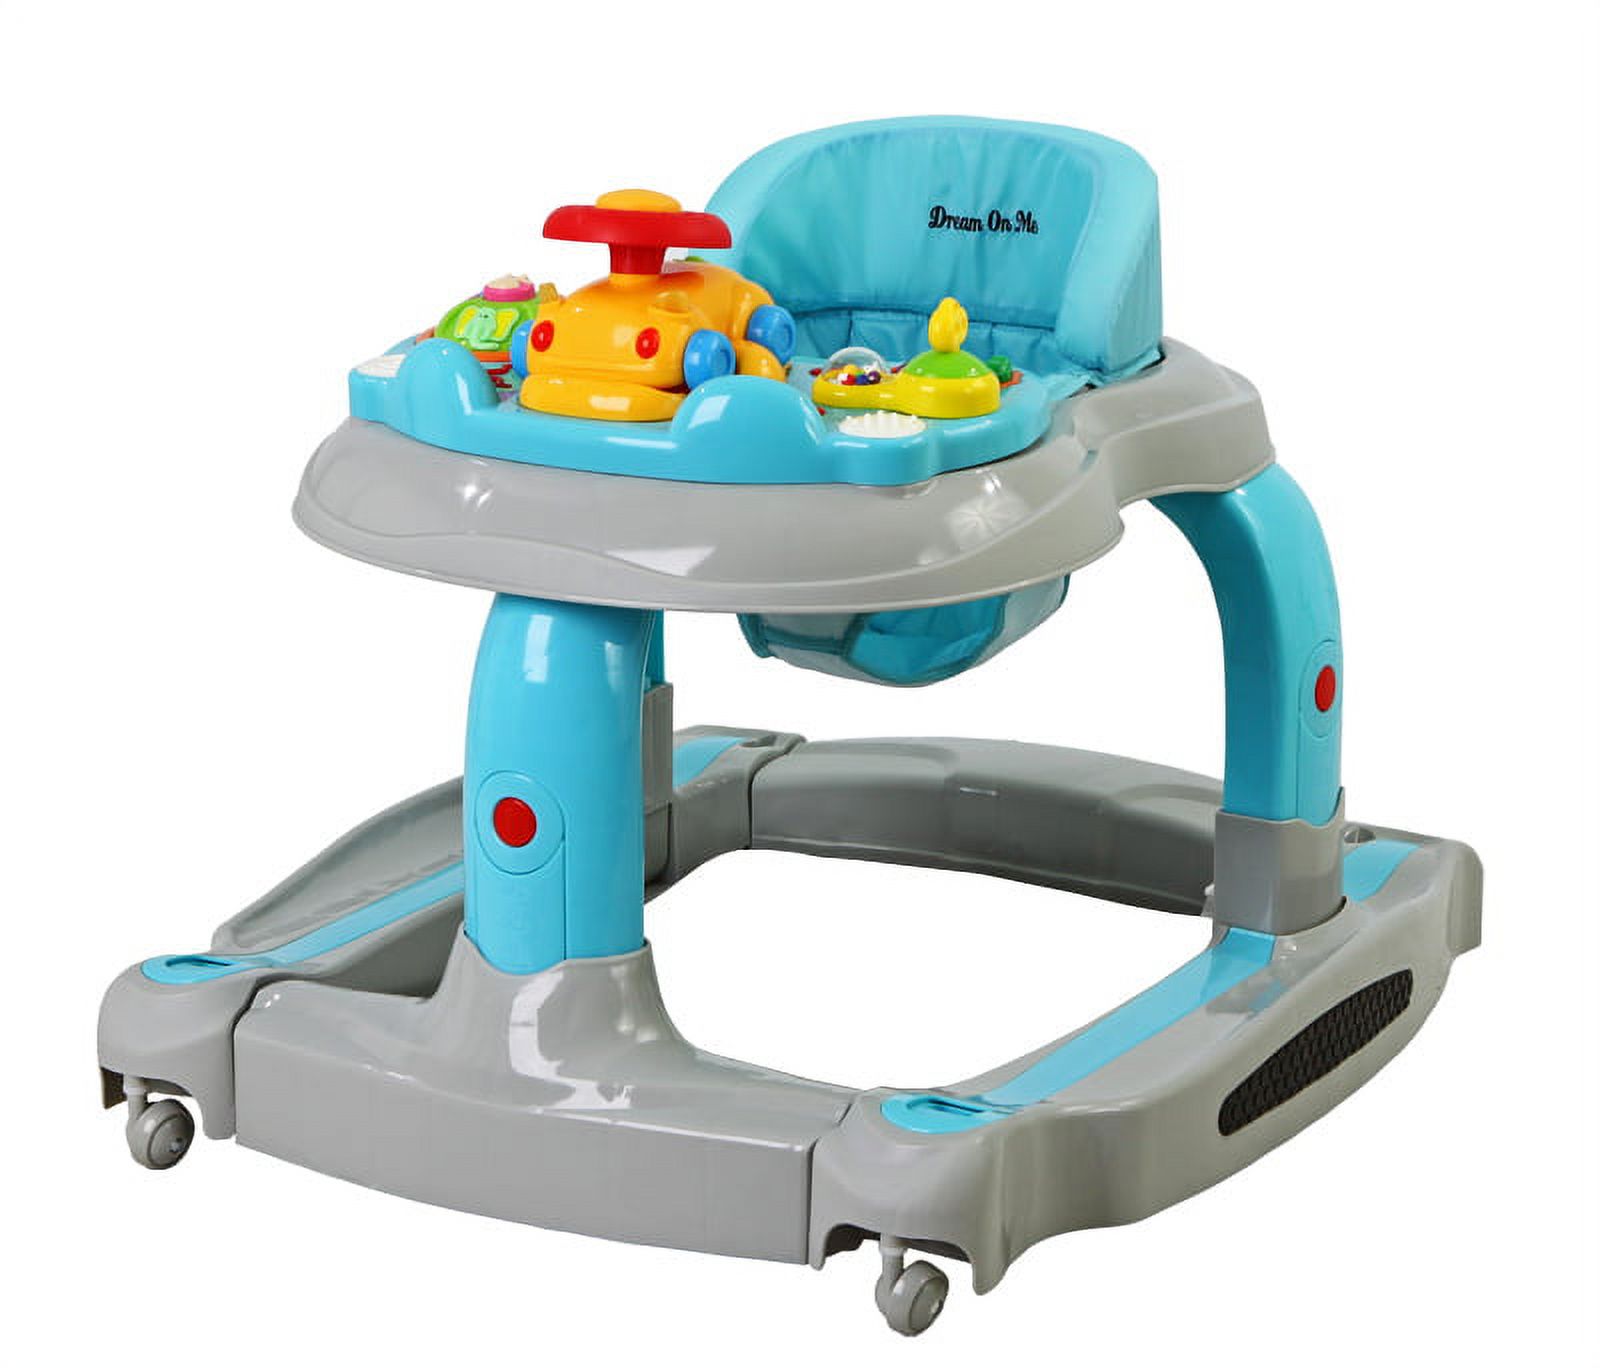 Dream On Me - 2-in-1 Baby Tunes Musical Activity Walker and Rocker, Gray - image 4 of 4